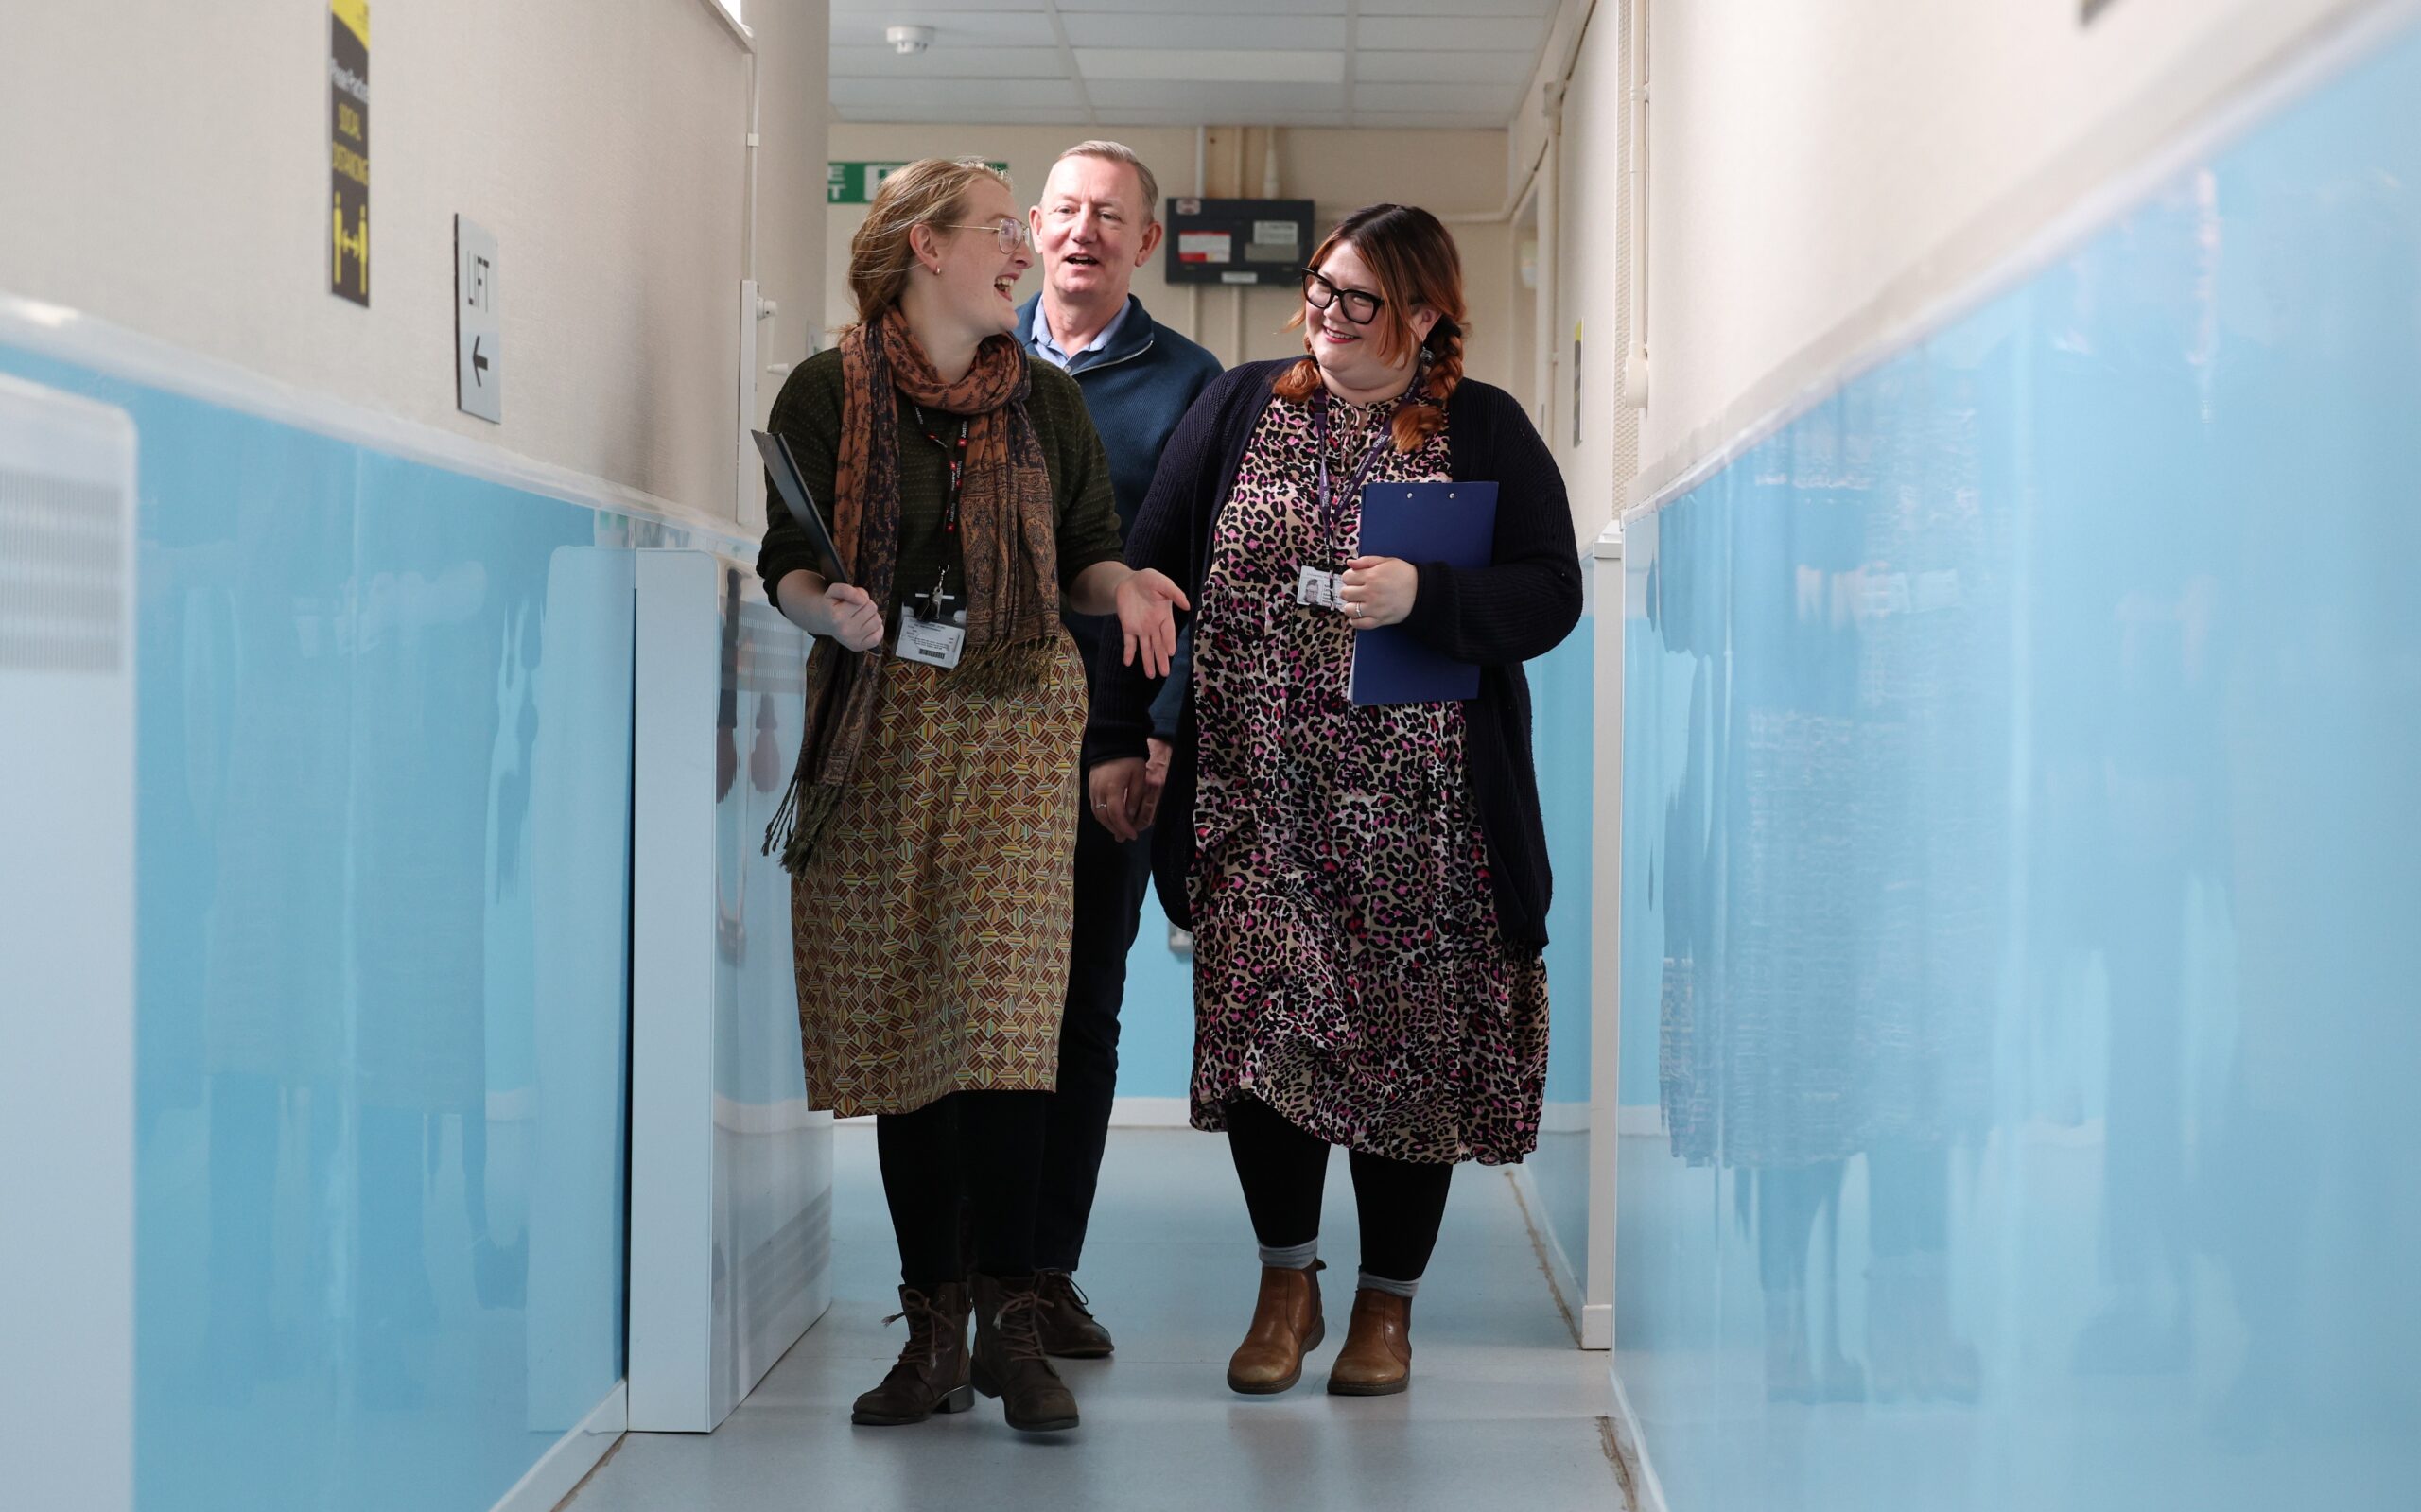 3 members of Arch's hospital inreach team, talking and chatting while they walk down a corridor, holding clipboards.